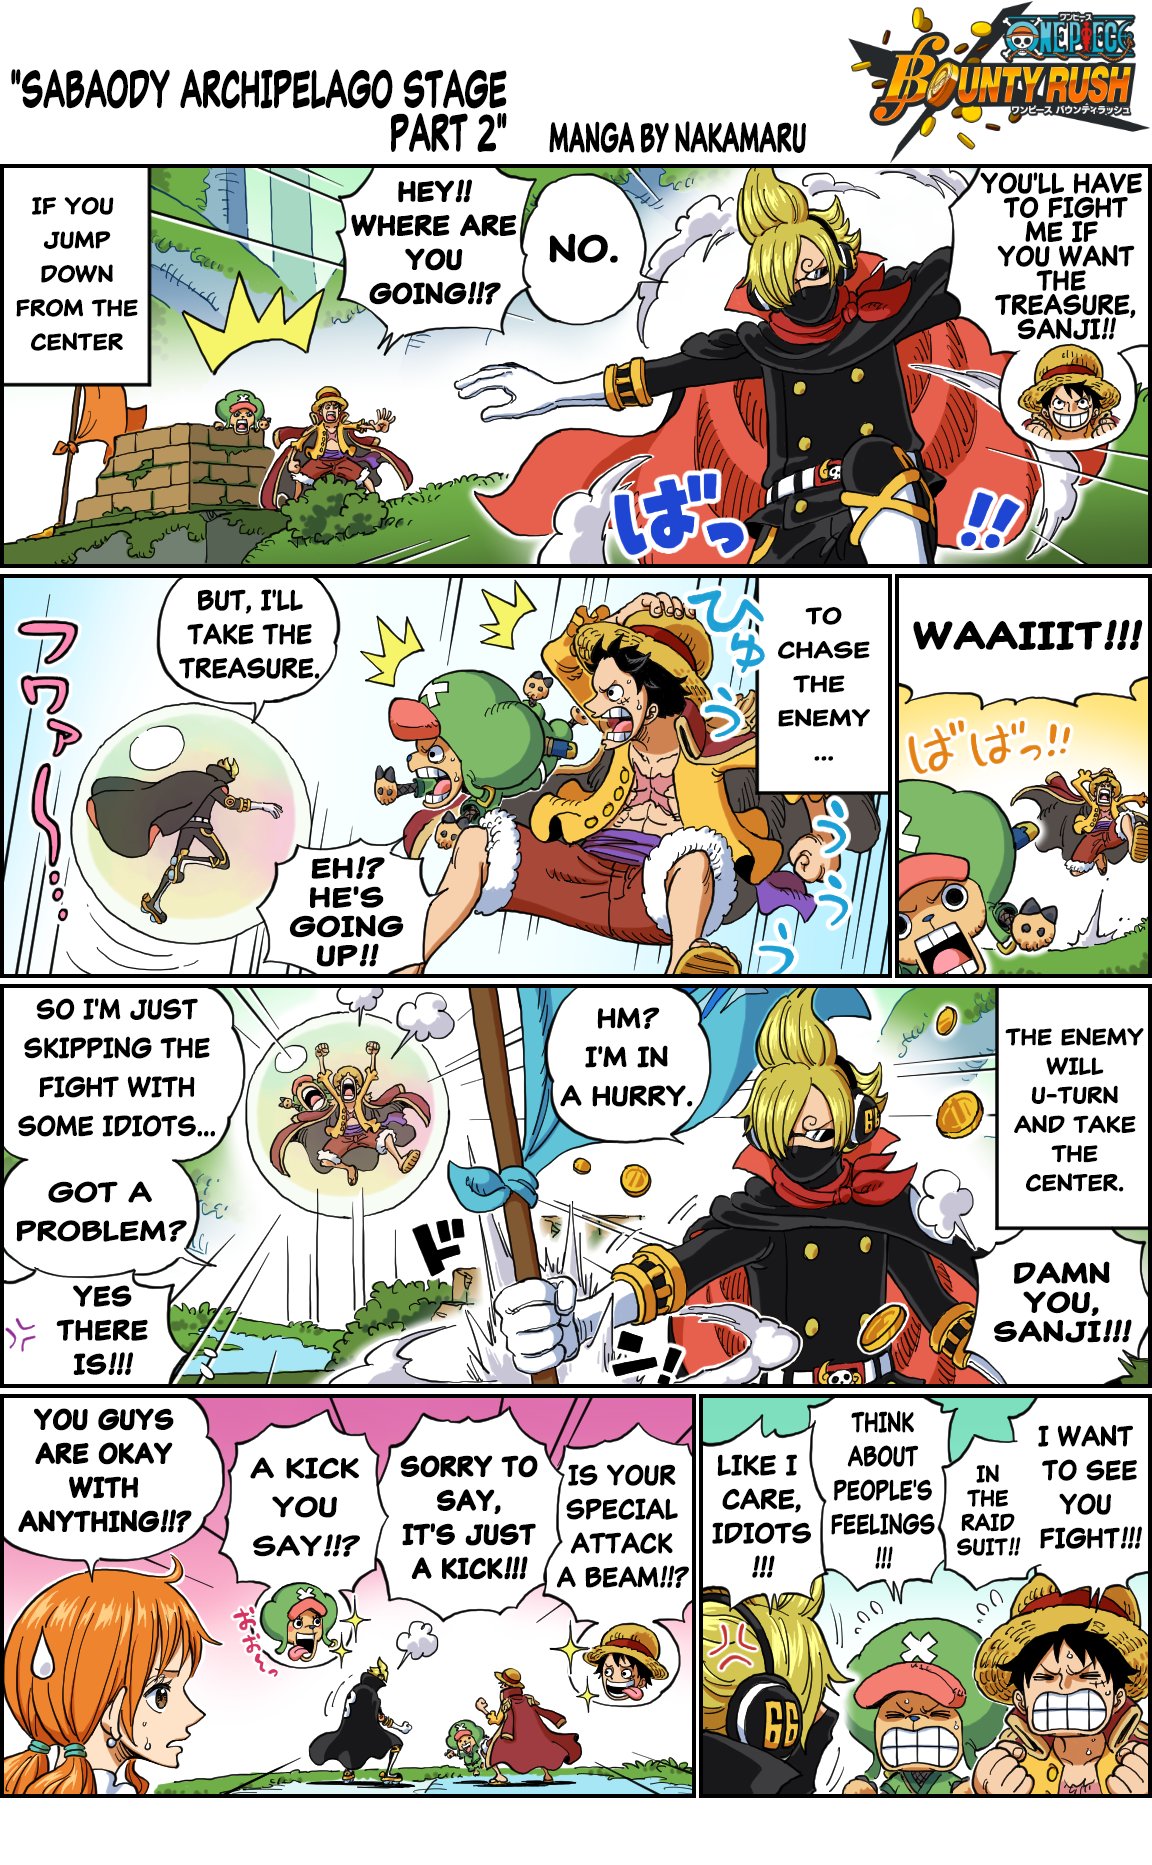 ONE PIECE Bounty Rush on X: ONE PIECE Bounty Rush Yeah, I Know! Manga  Has this ever happened to you before? Today's subject is No Escape!  #BountyRush #ONEPIECE  / X